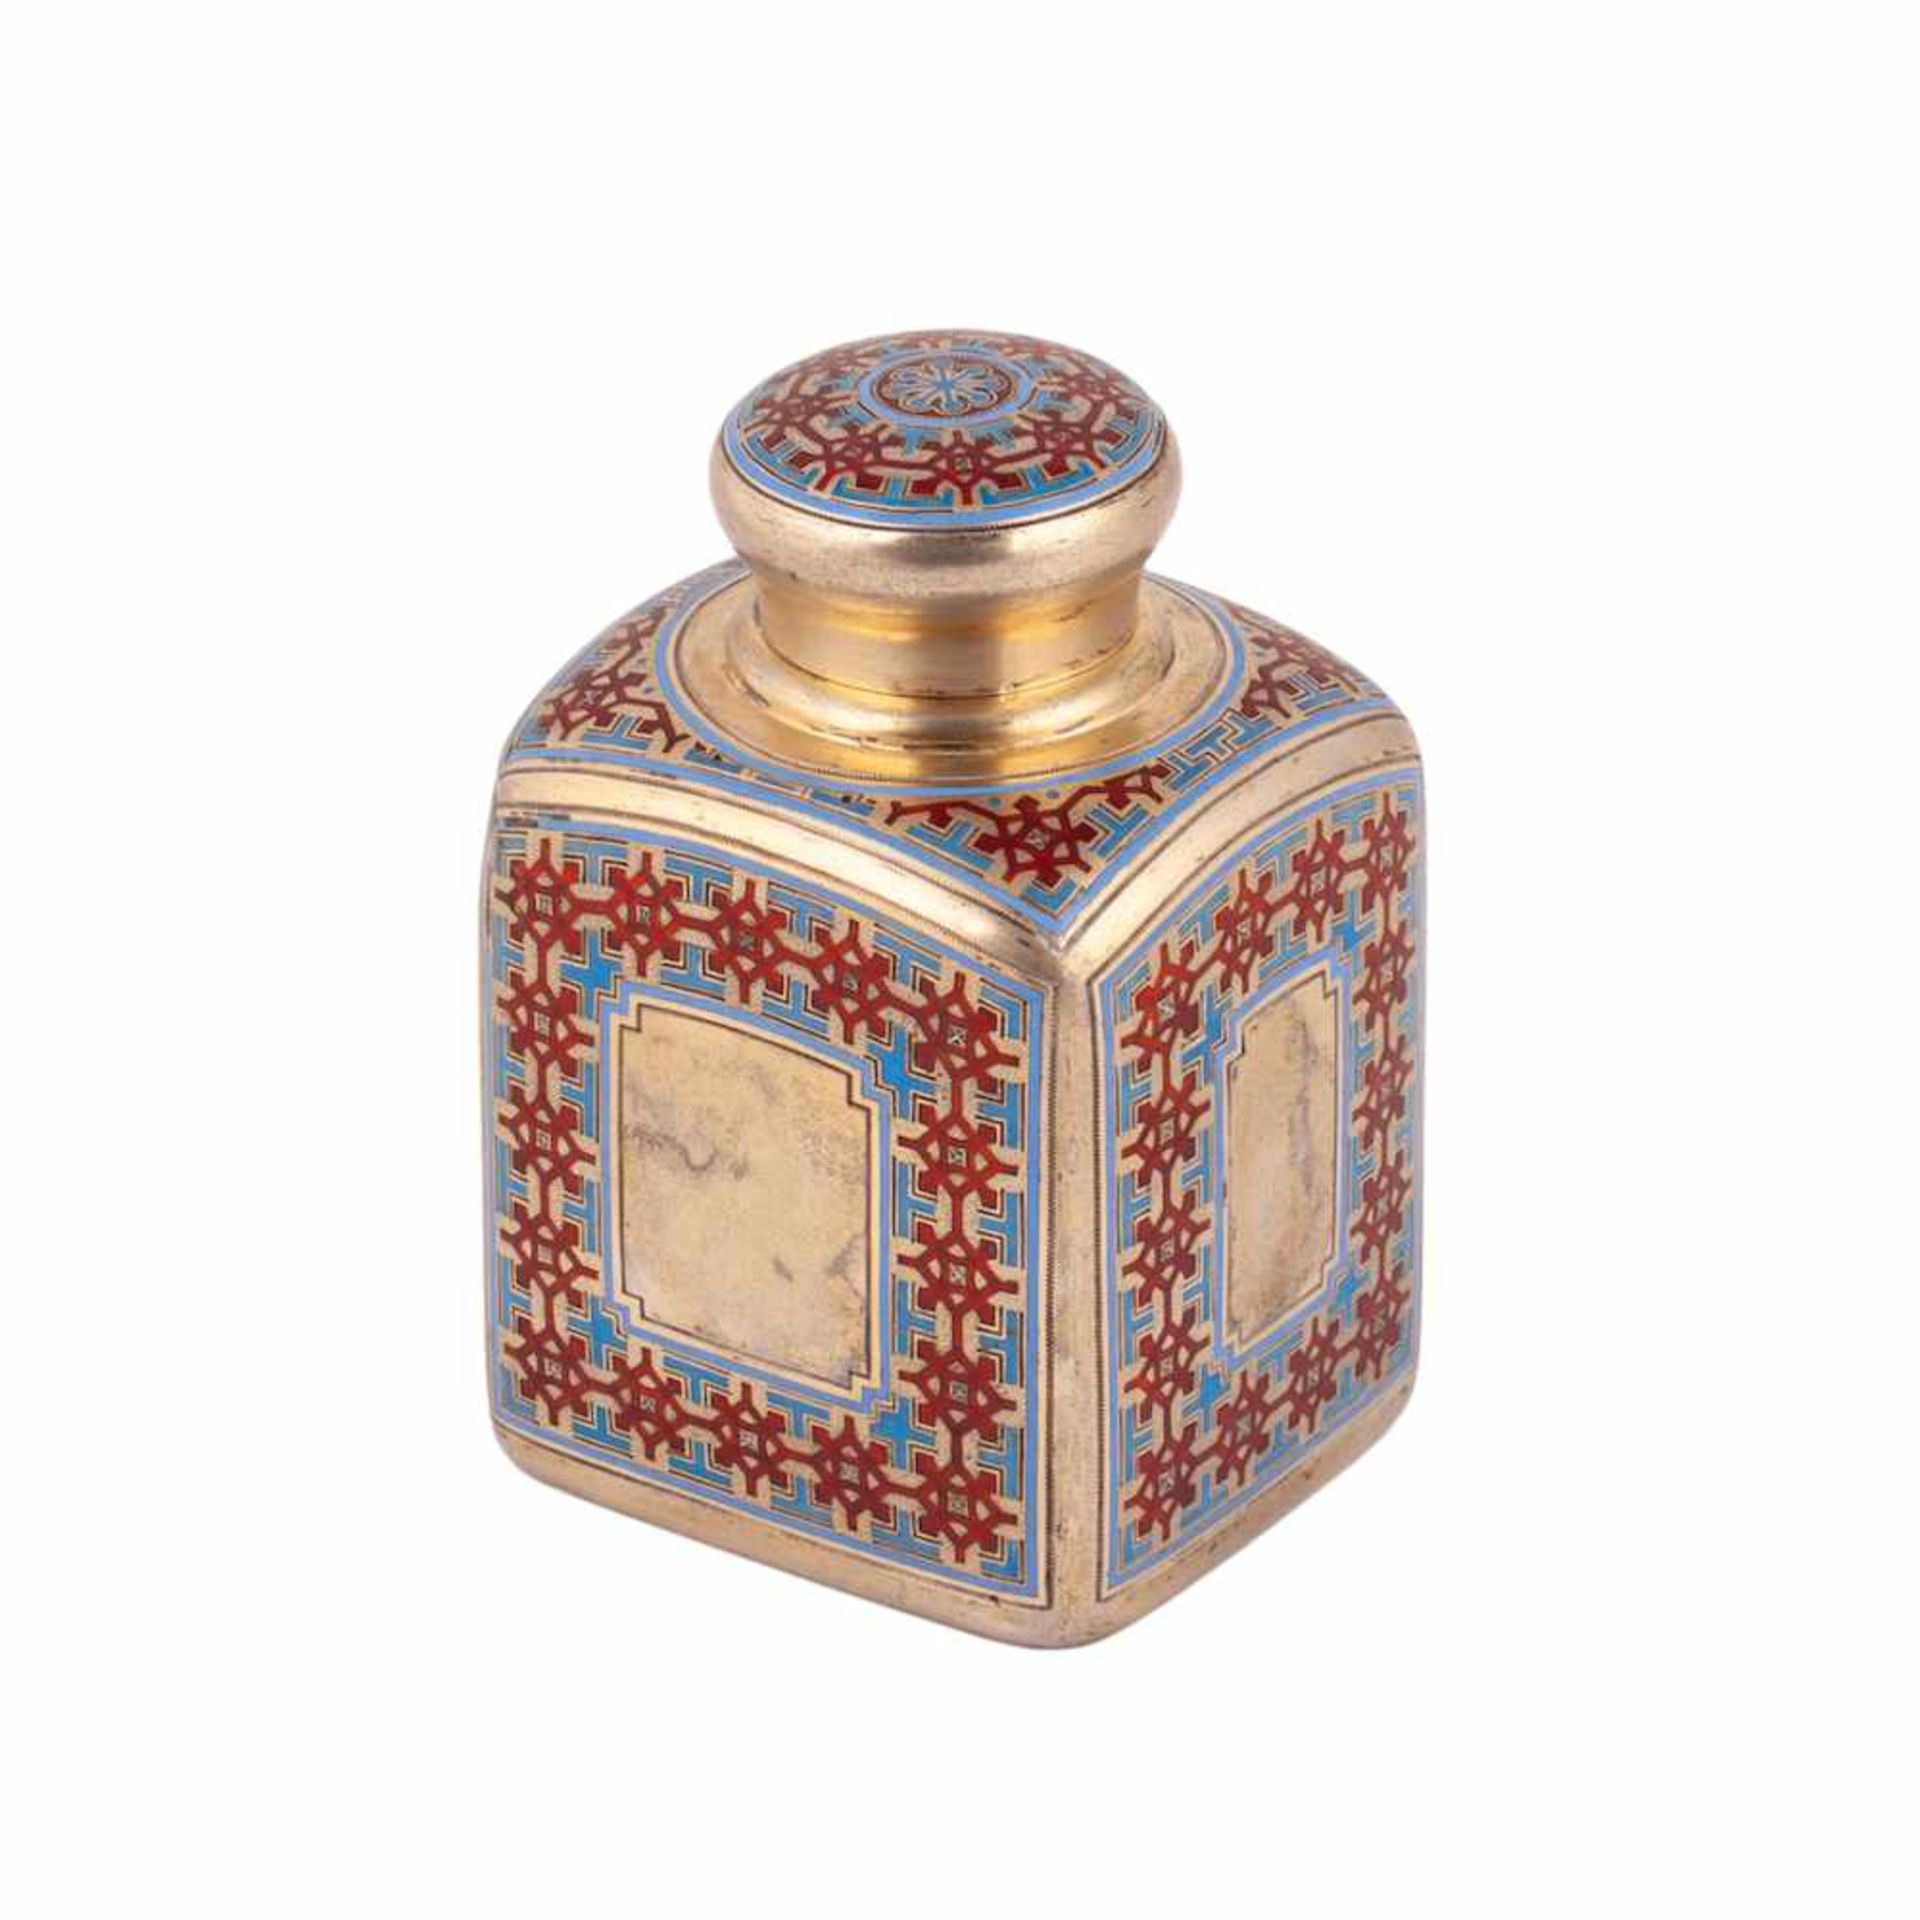 A Silver-gilt tea caddy in Russian style